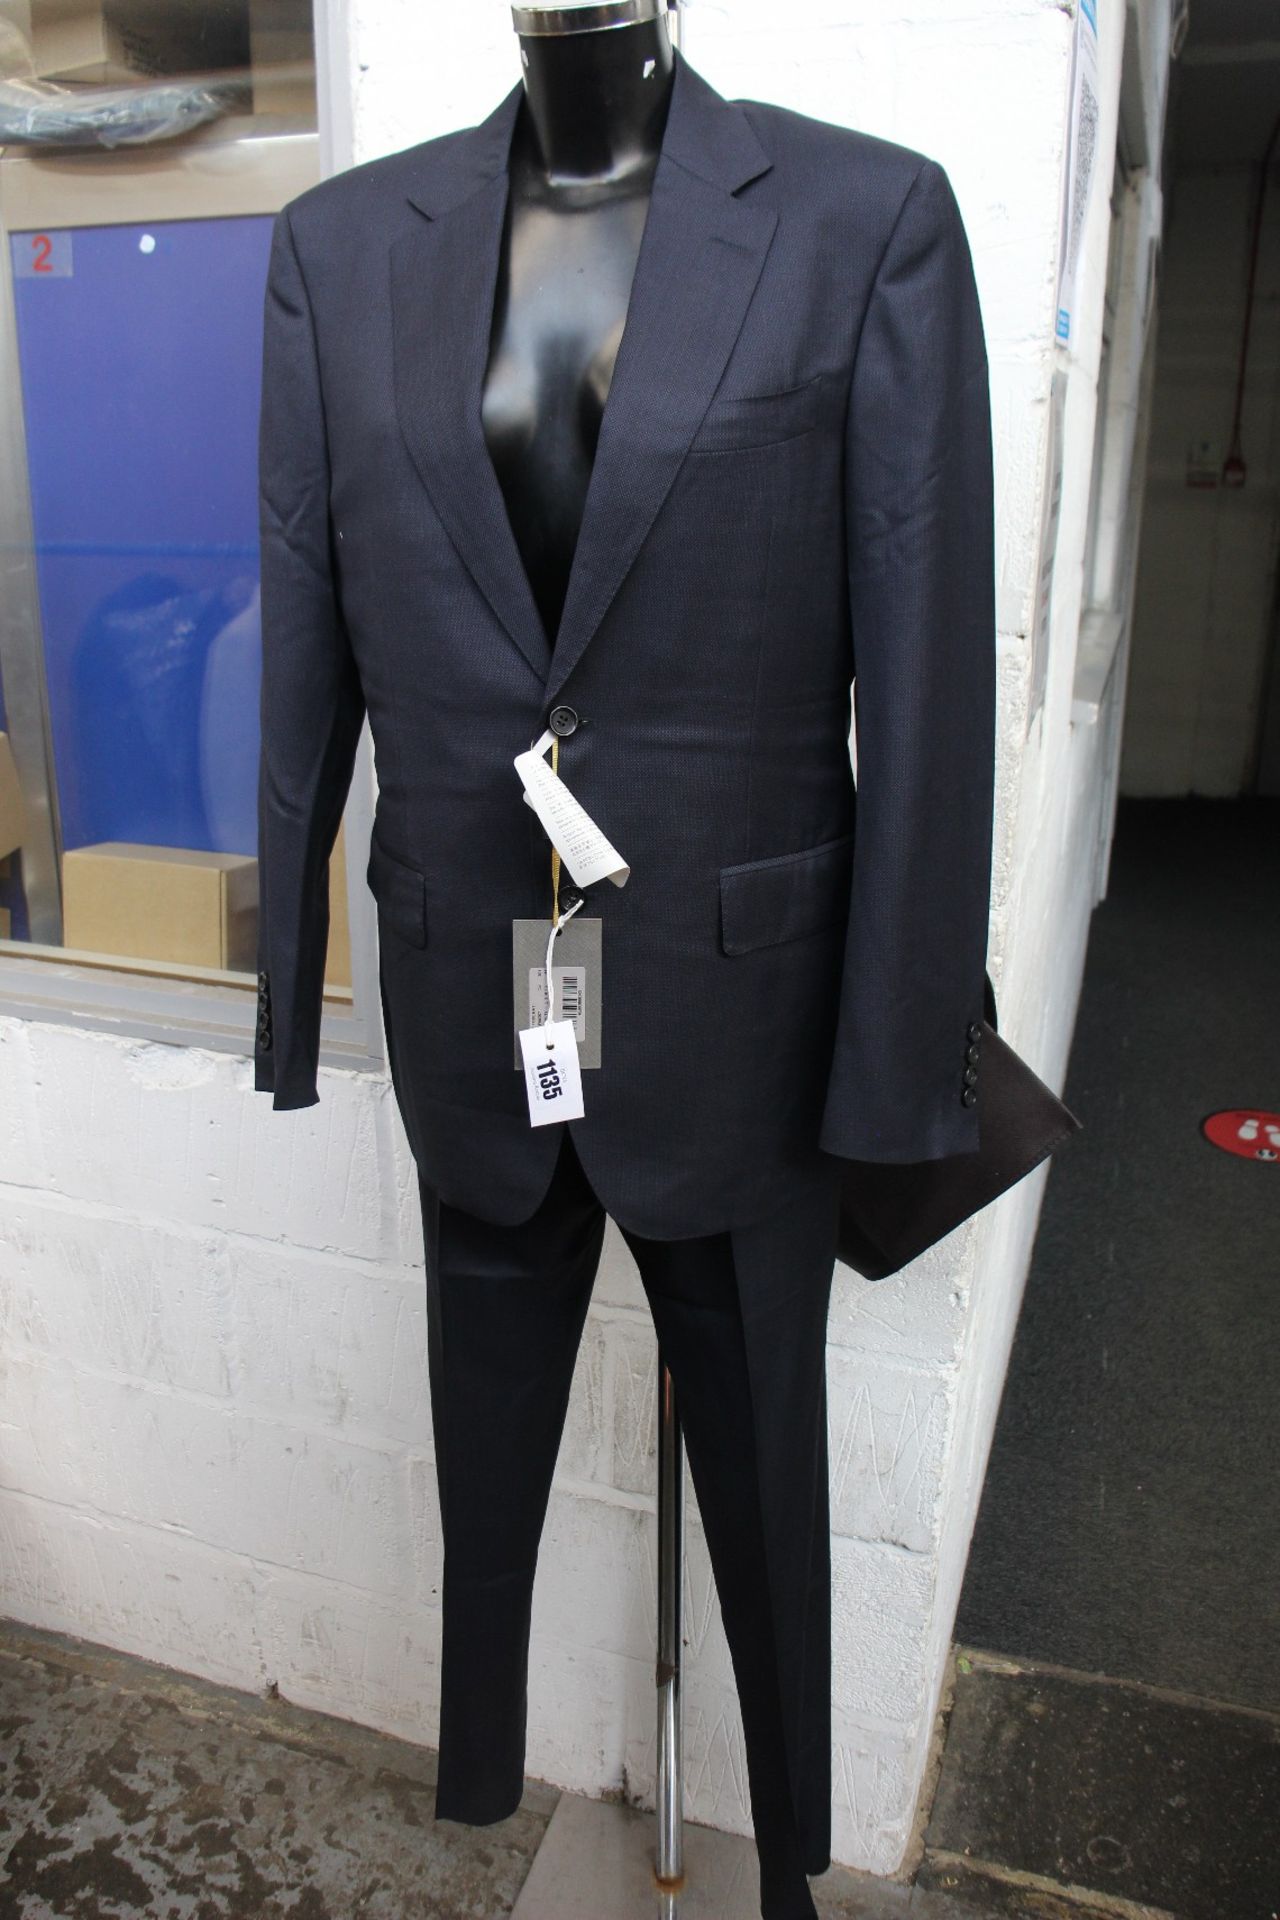 An as new Canali lined suit (Size 48? - RRP £945).